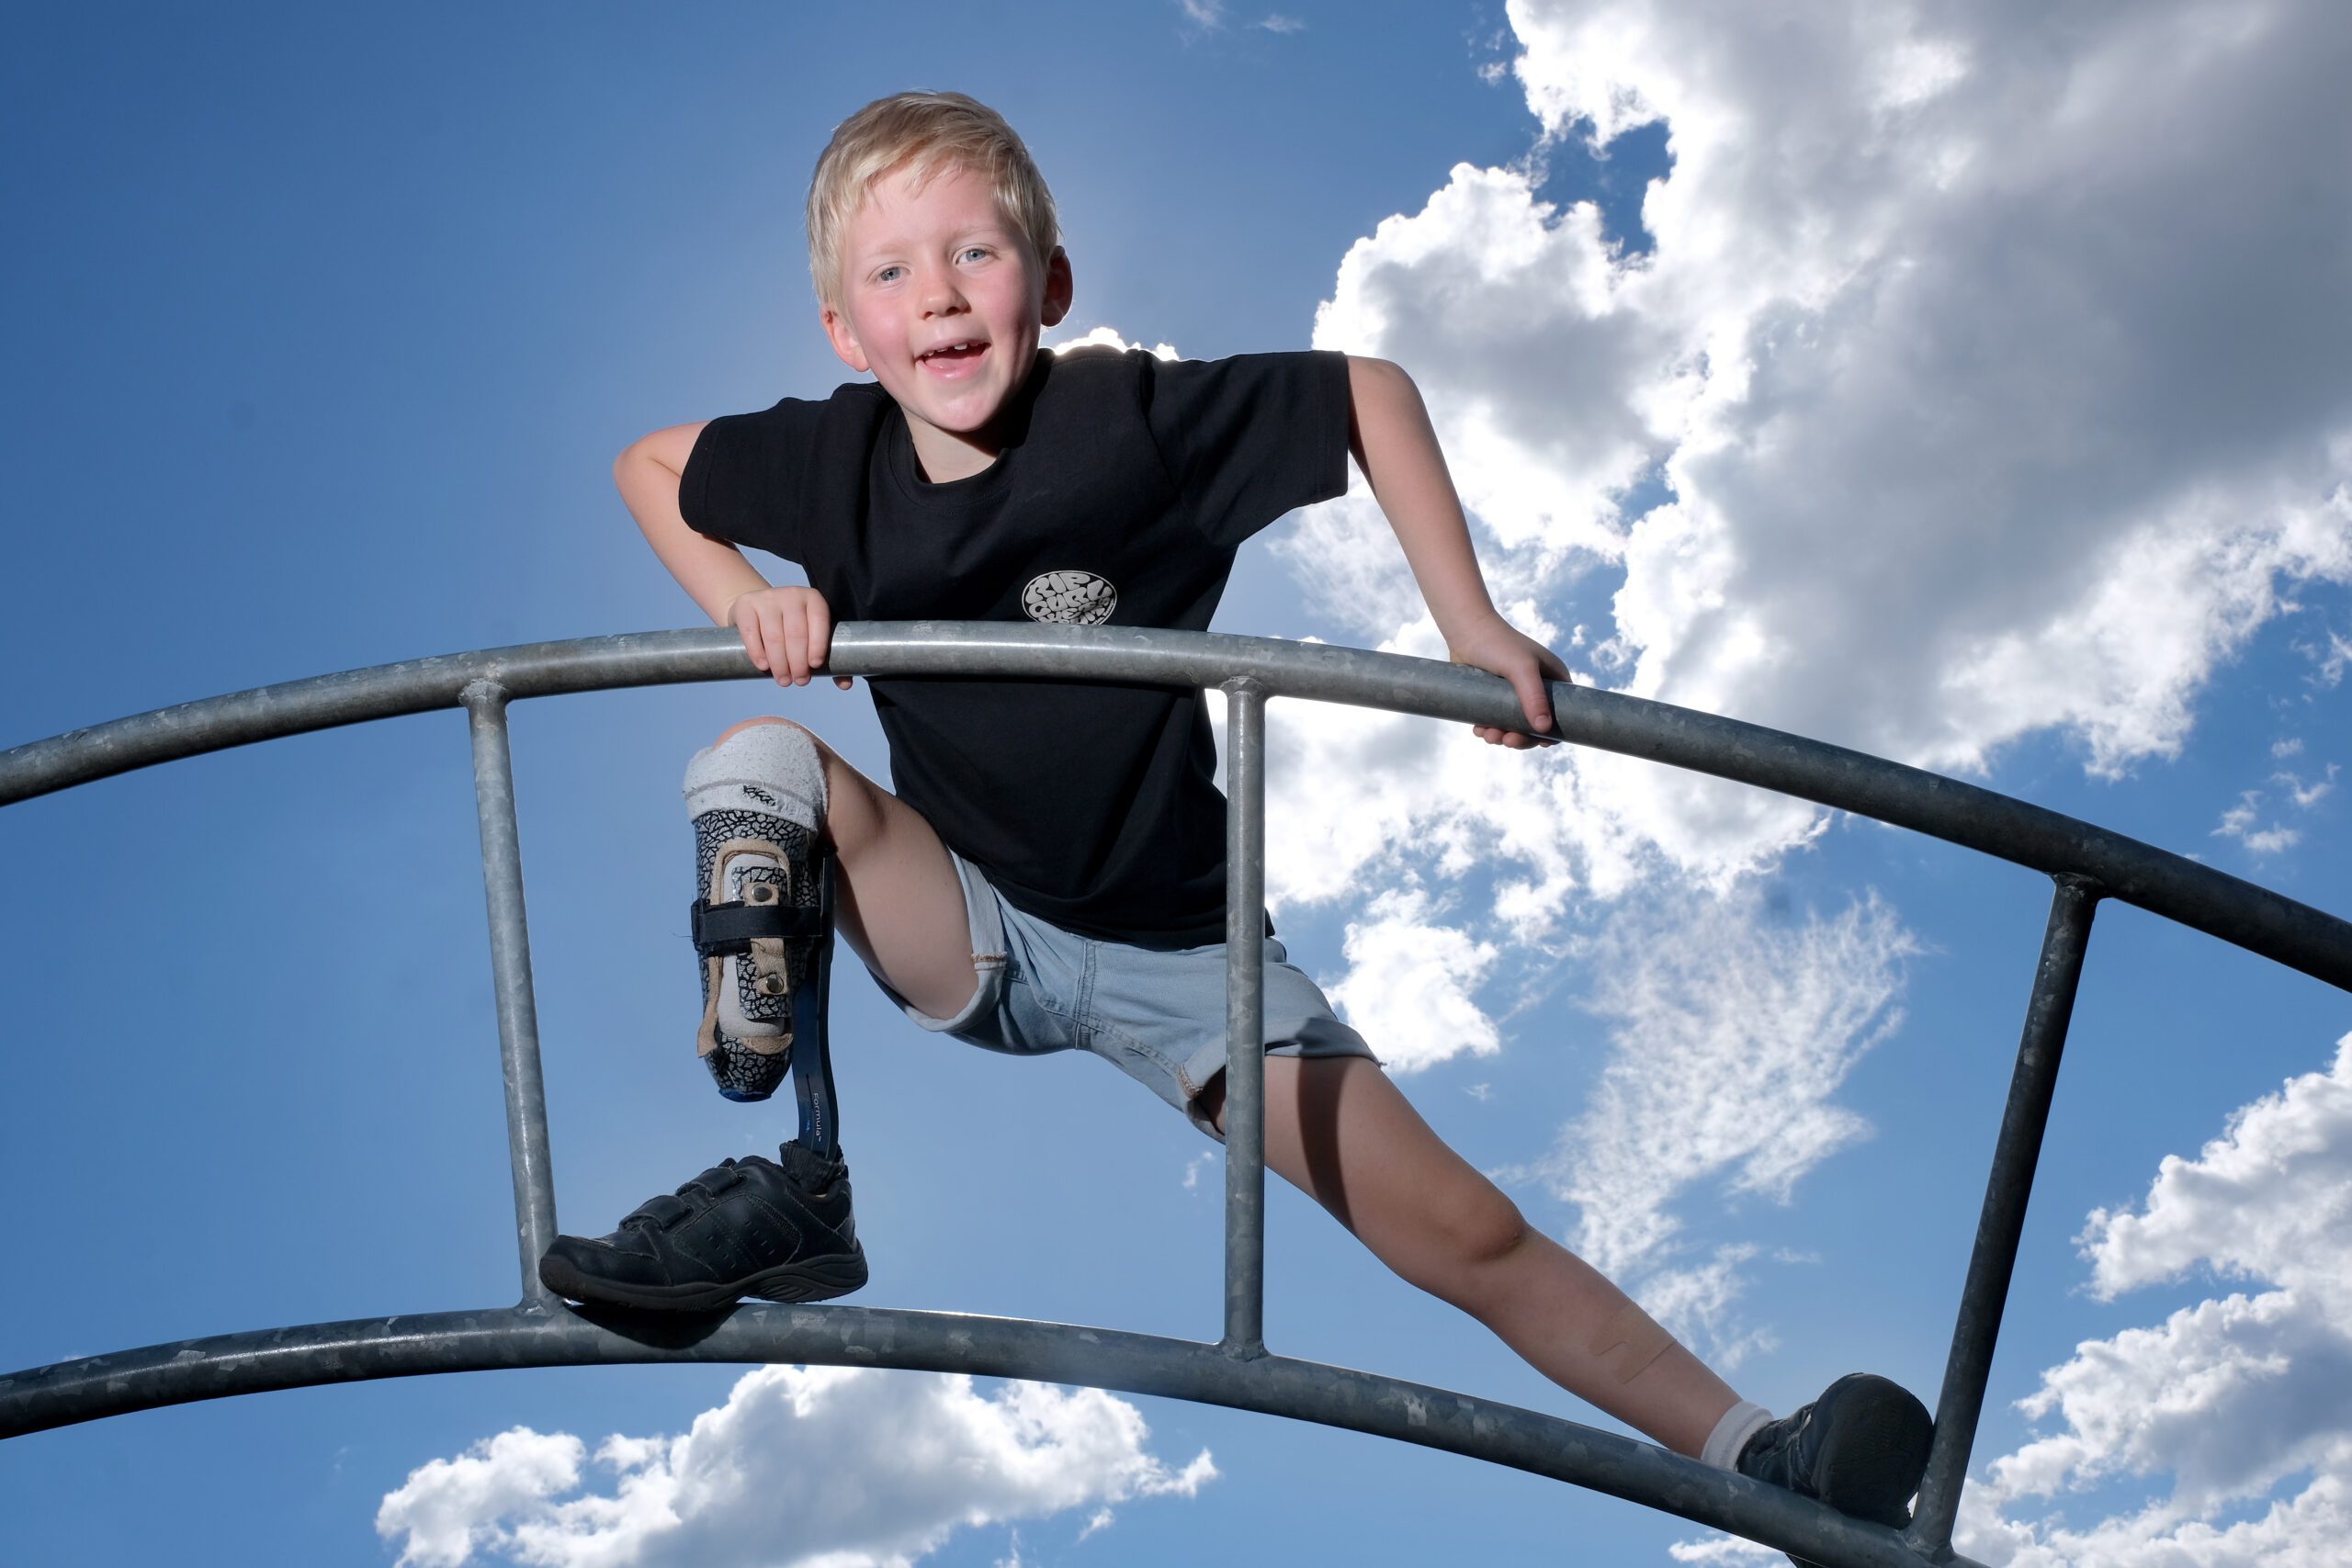 Child on play equipment with a prosthetic leg